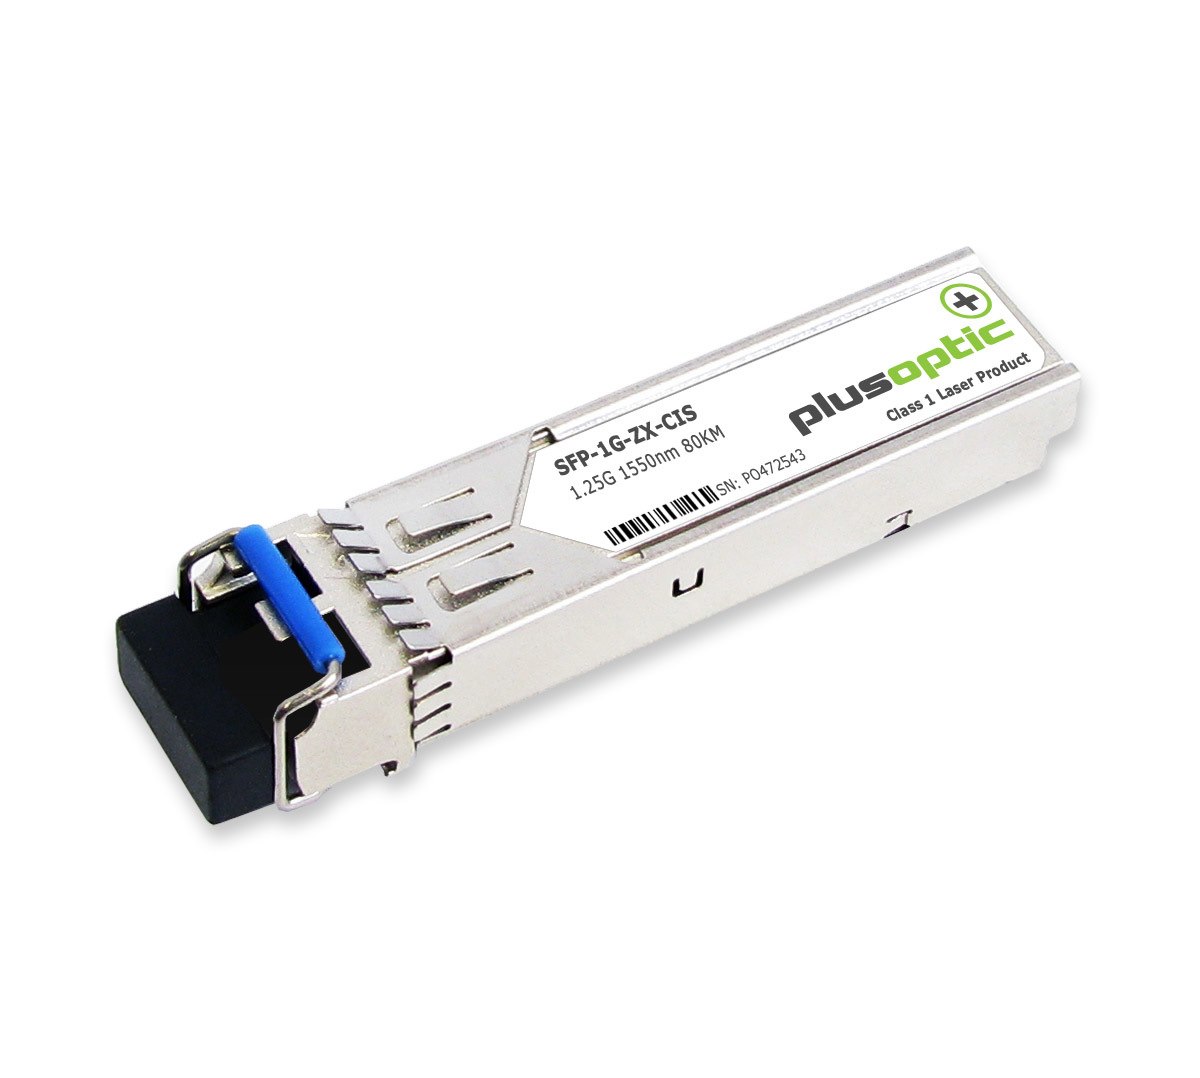 PlusOptic Cisco Compatible (GLC-ZX-SM GLC-ZX-SMD Ons-Se-Ge-Zx Sfp-Ge-Z) 1.25G, SFP, 1550NM, 80KM Transceiver, LC Connector For SMF With Dom | PlusOptic Sfp-1G-Zx-Cis